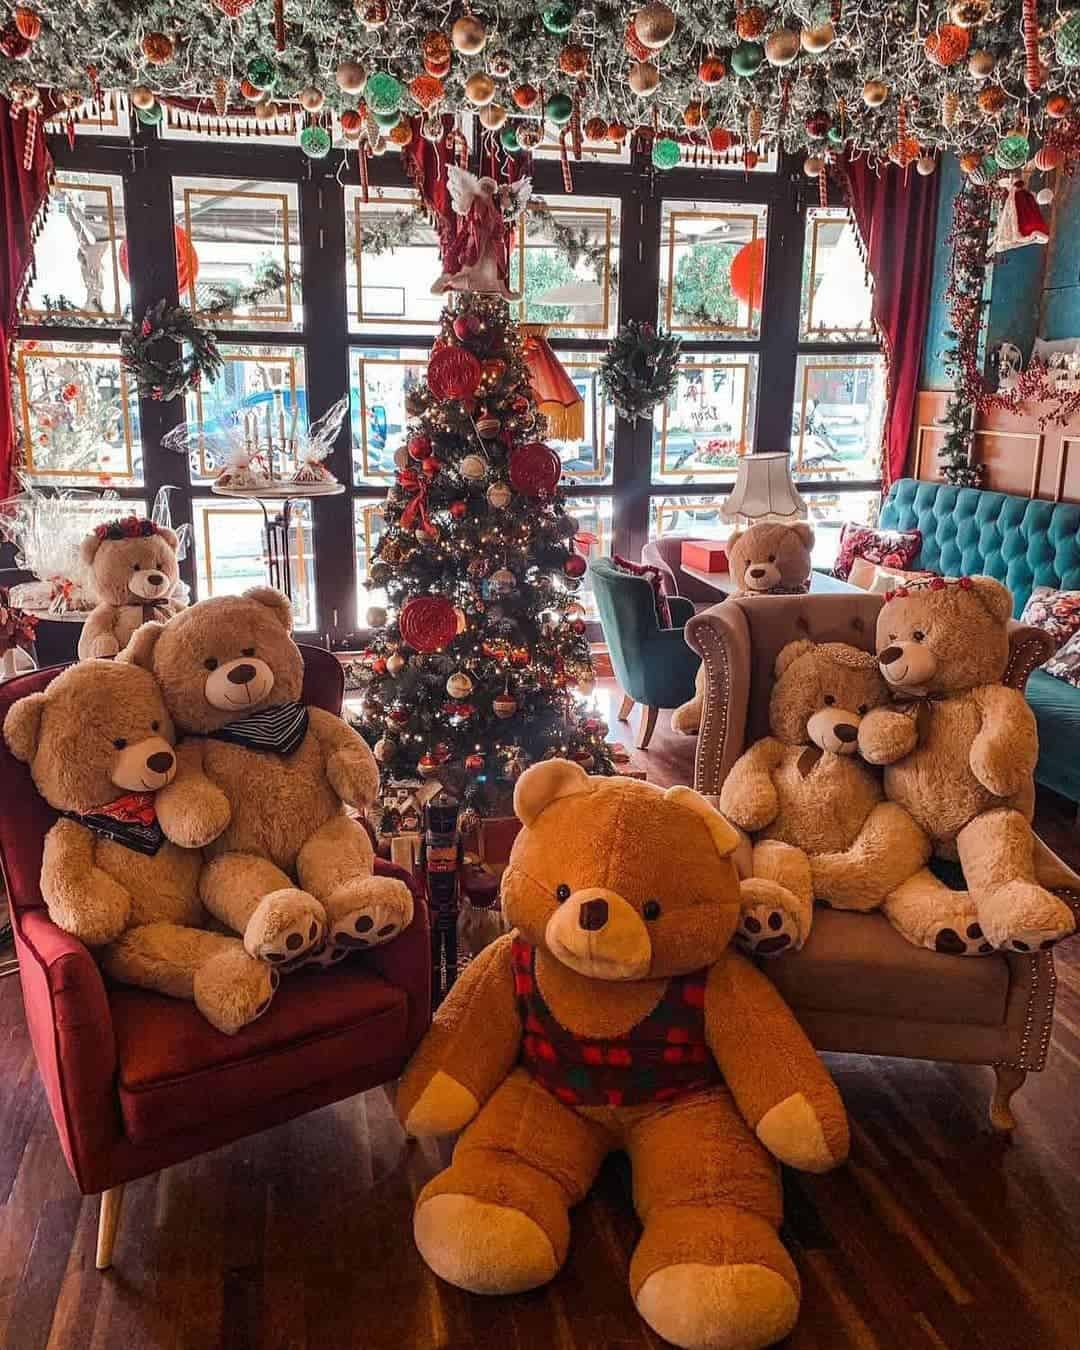 Teddy Bear Images for DP